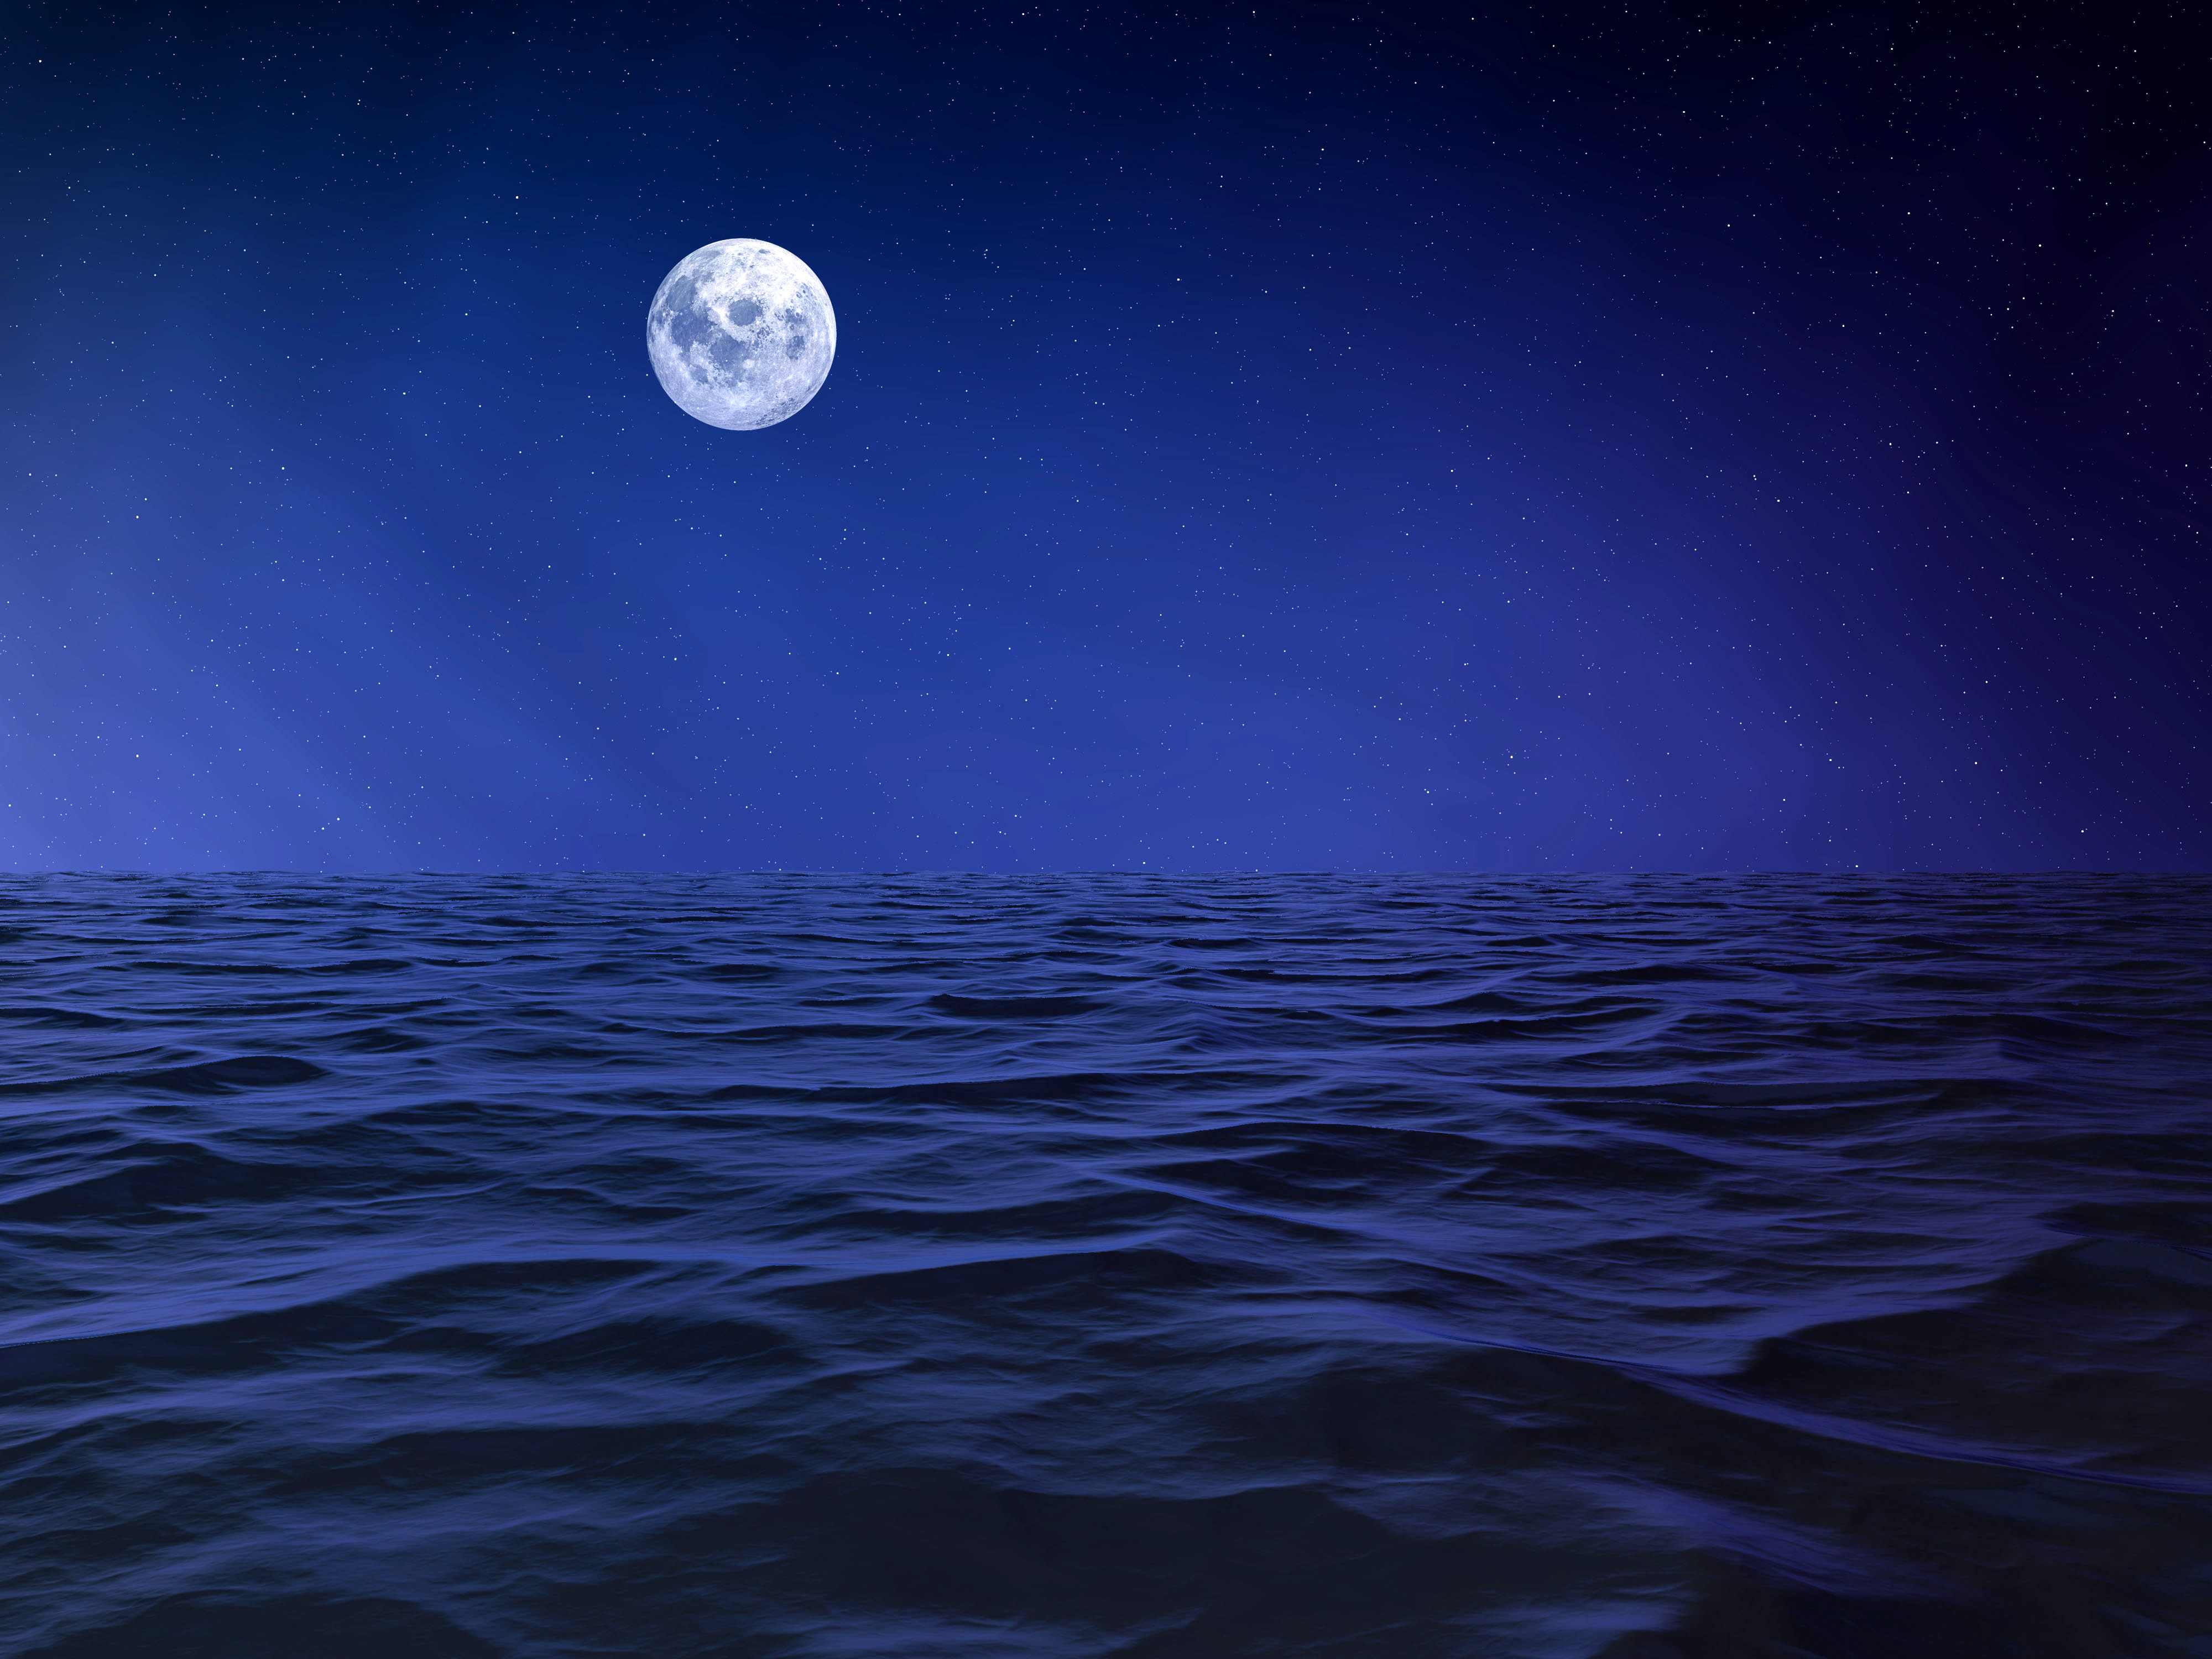 Moon Over The Ocean Nightscape Image Free Stock Photo Public Domain Photo Cc0 Images